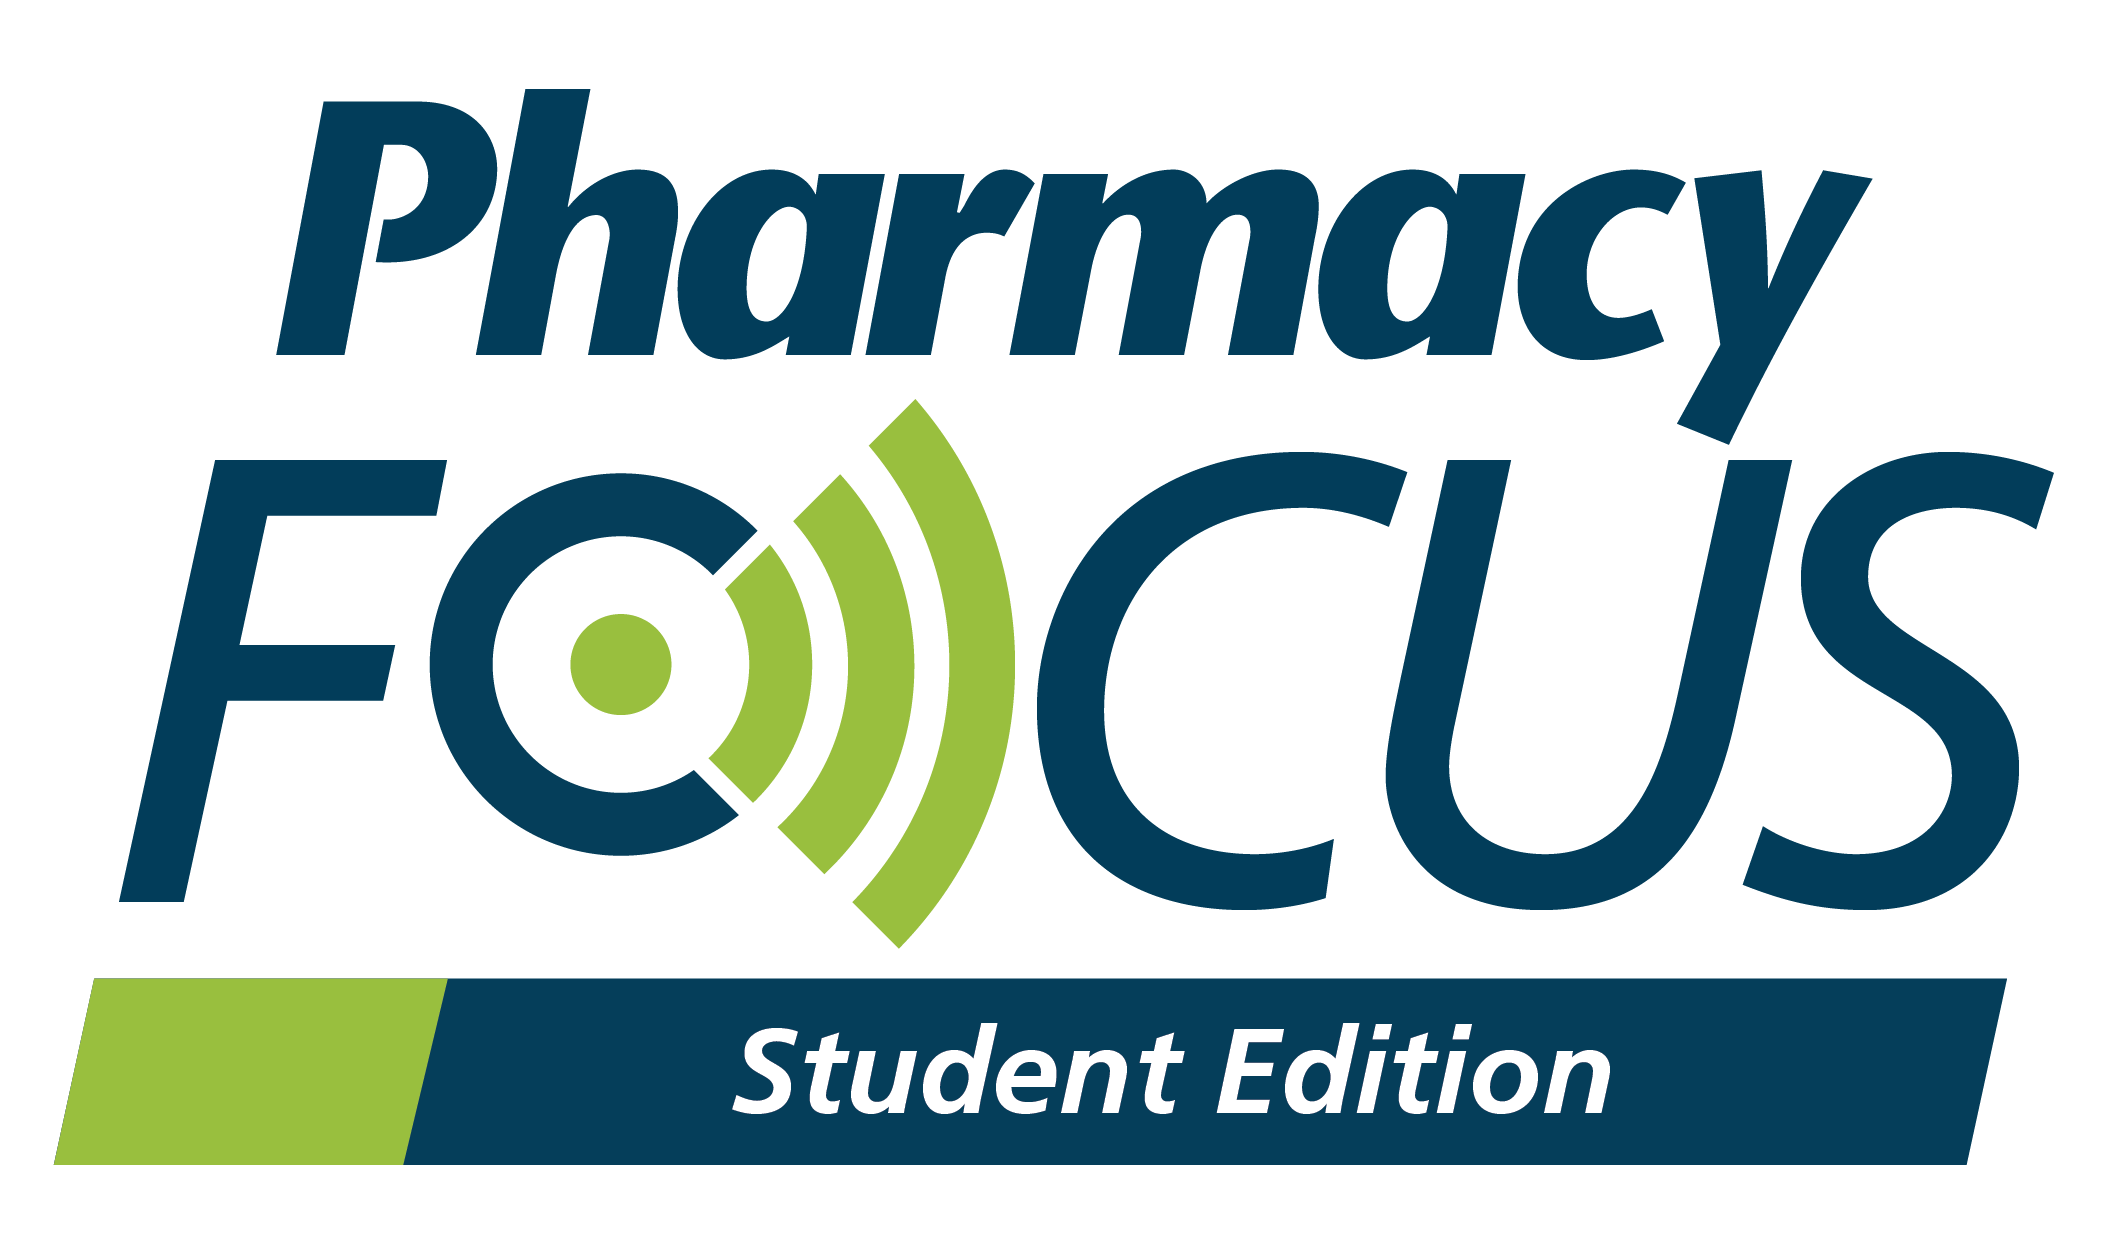 Pharmacy Focus: Student Edition - Communication Skills for Pharmacy Students